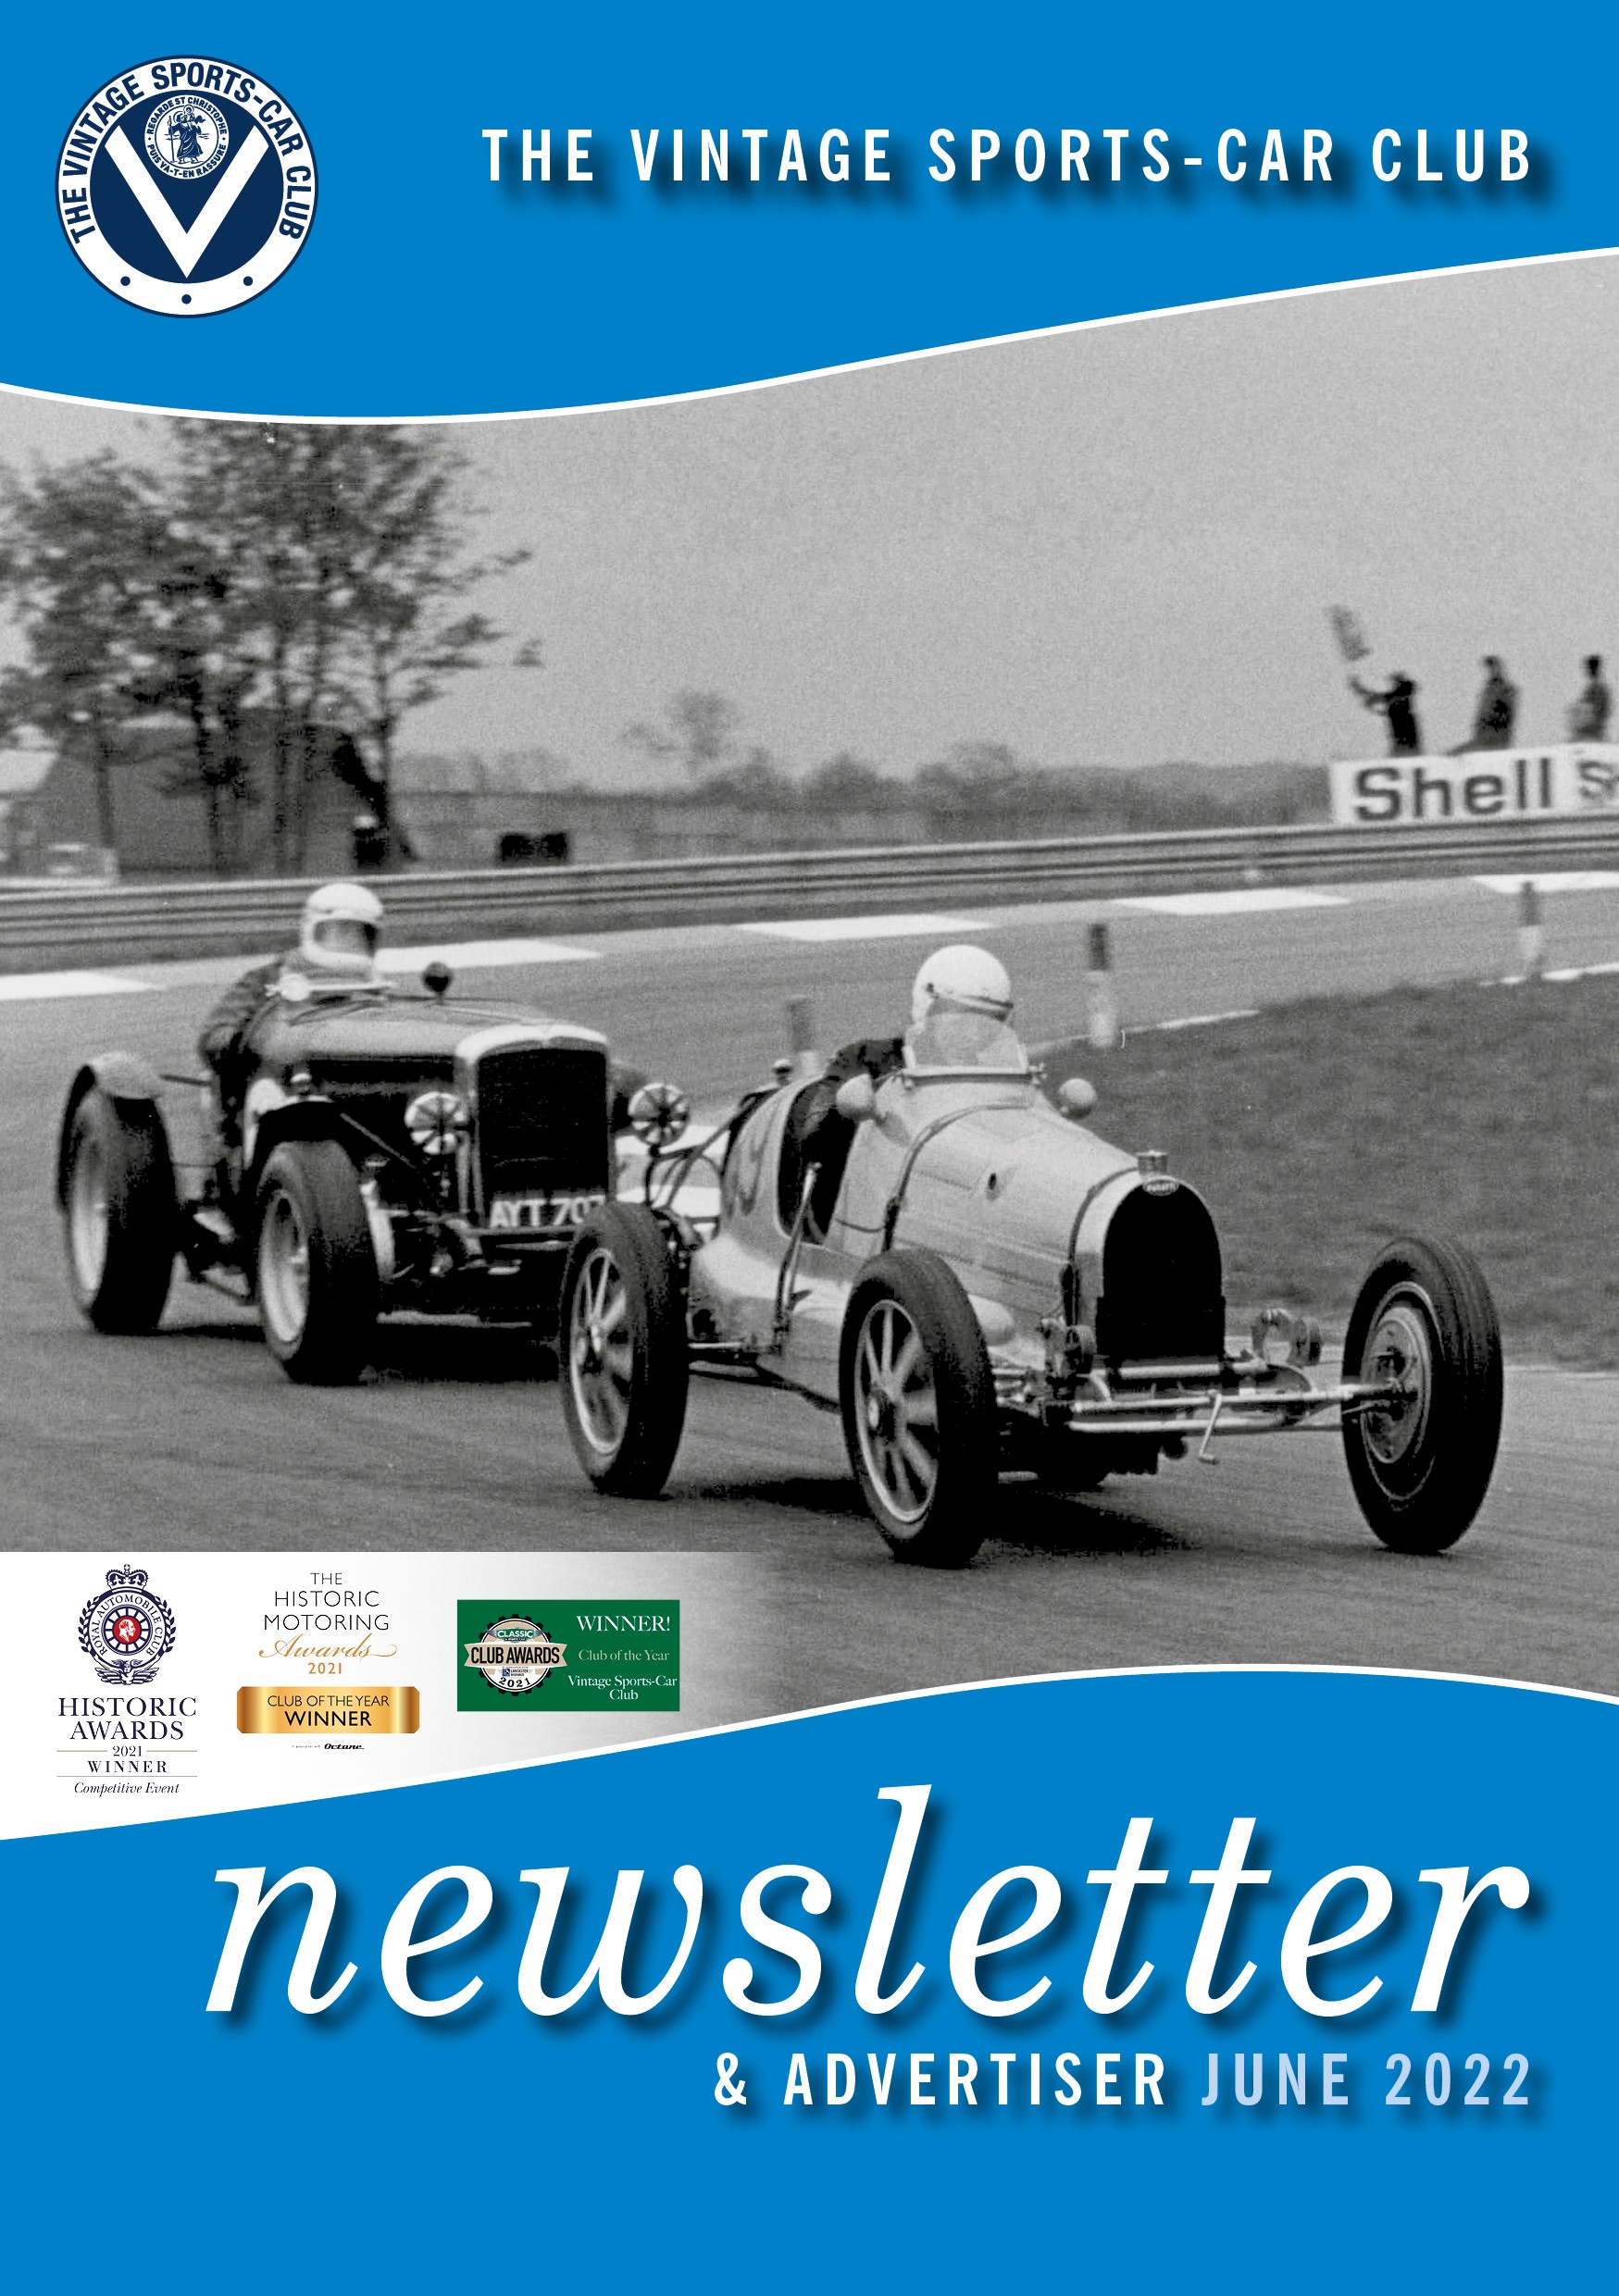 June 2022 Newsletter Now Available